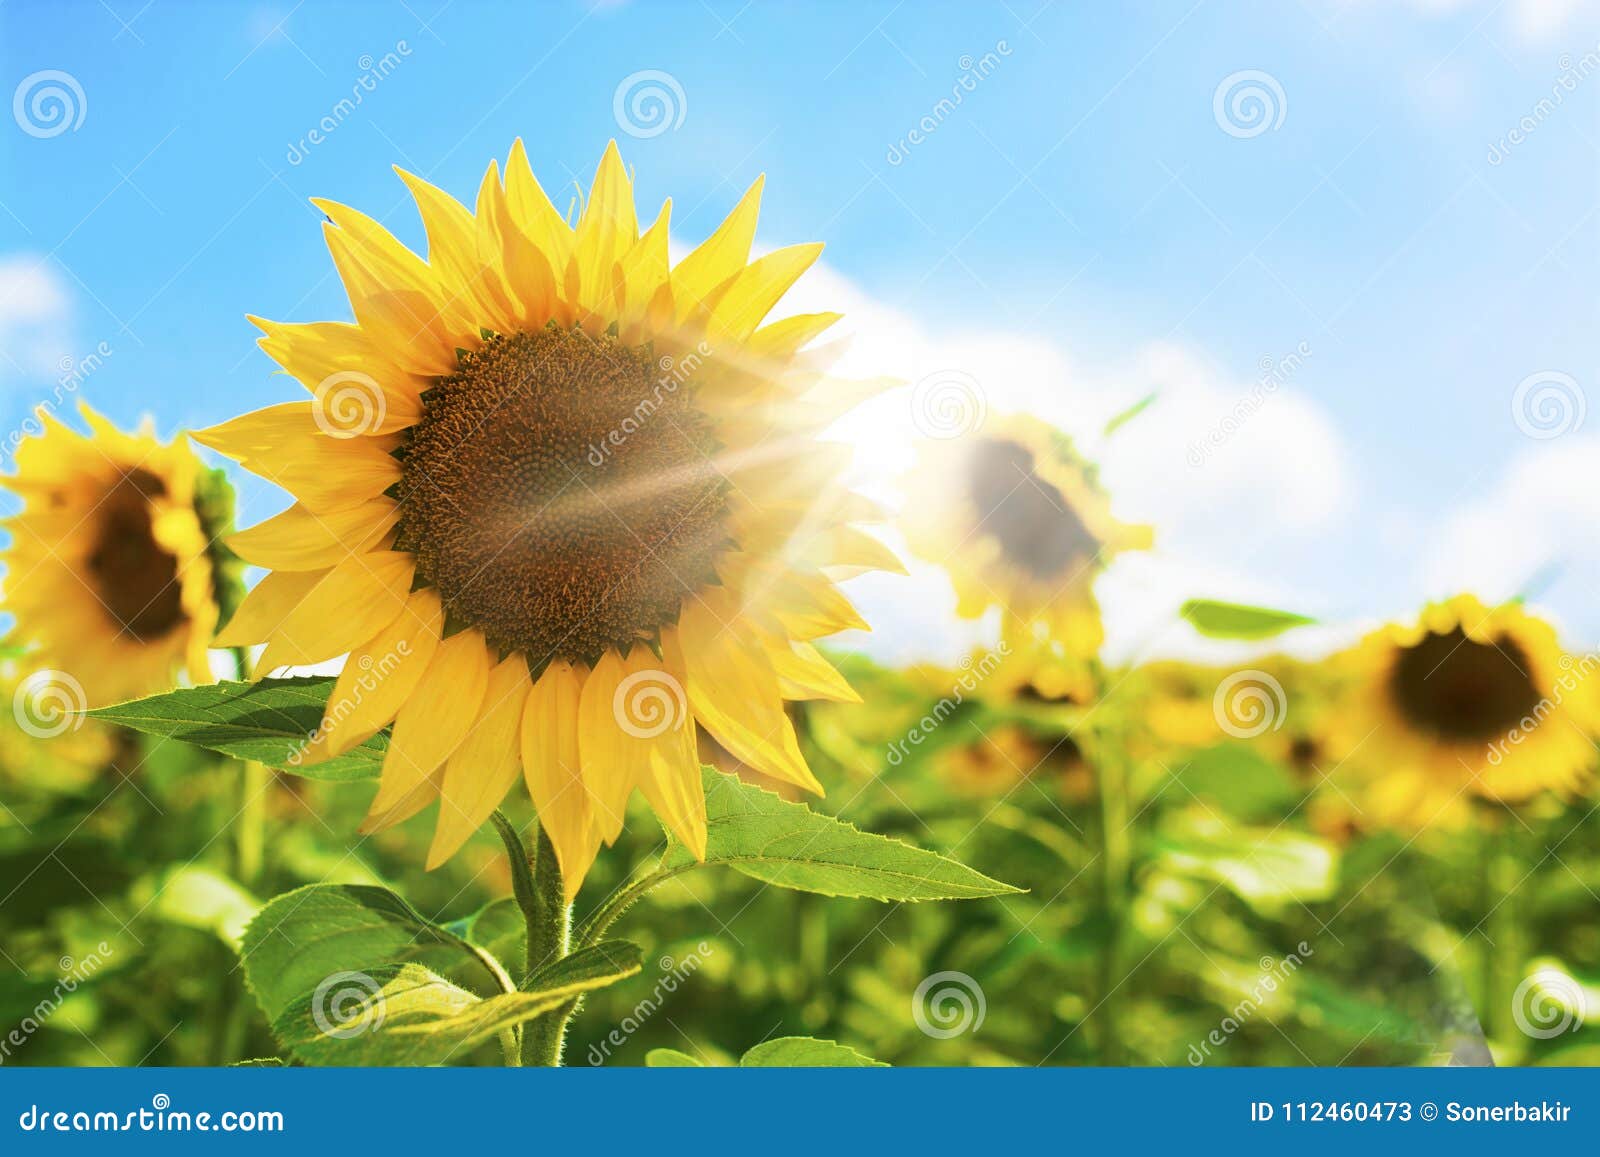 Sunflower and Bright sun stock image. Image of dazzling - 112460473